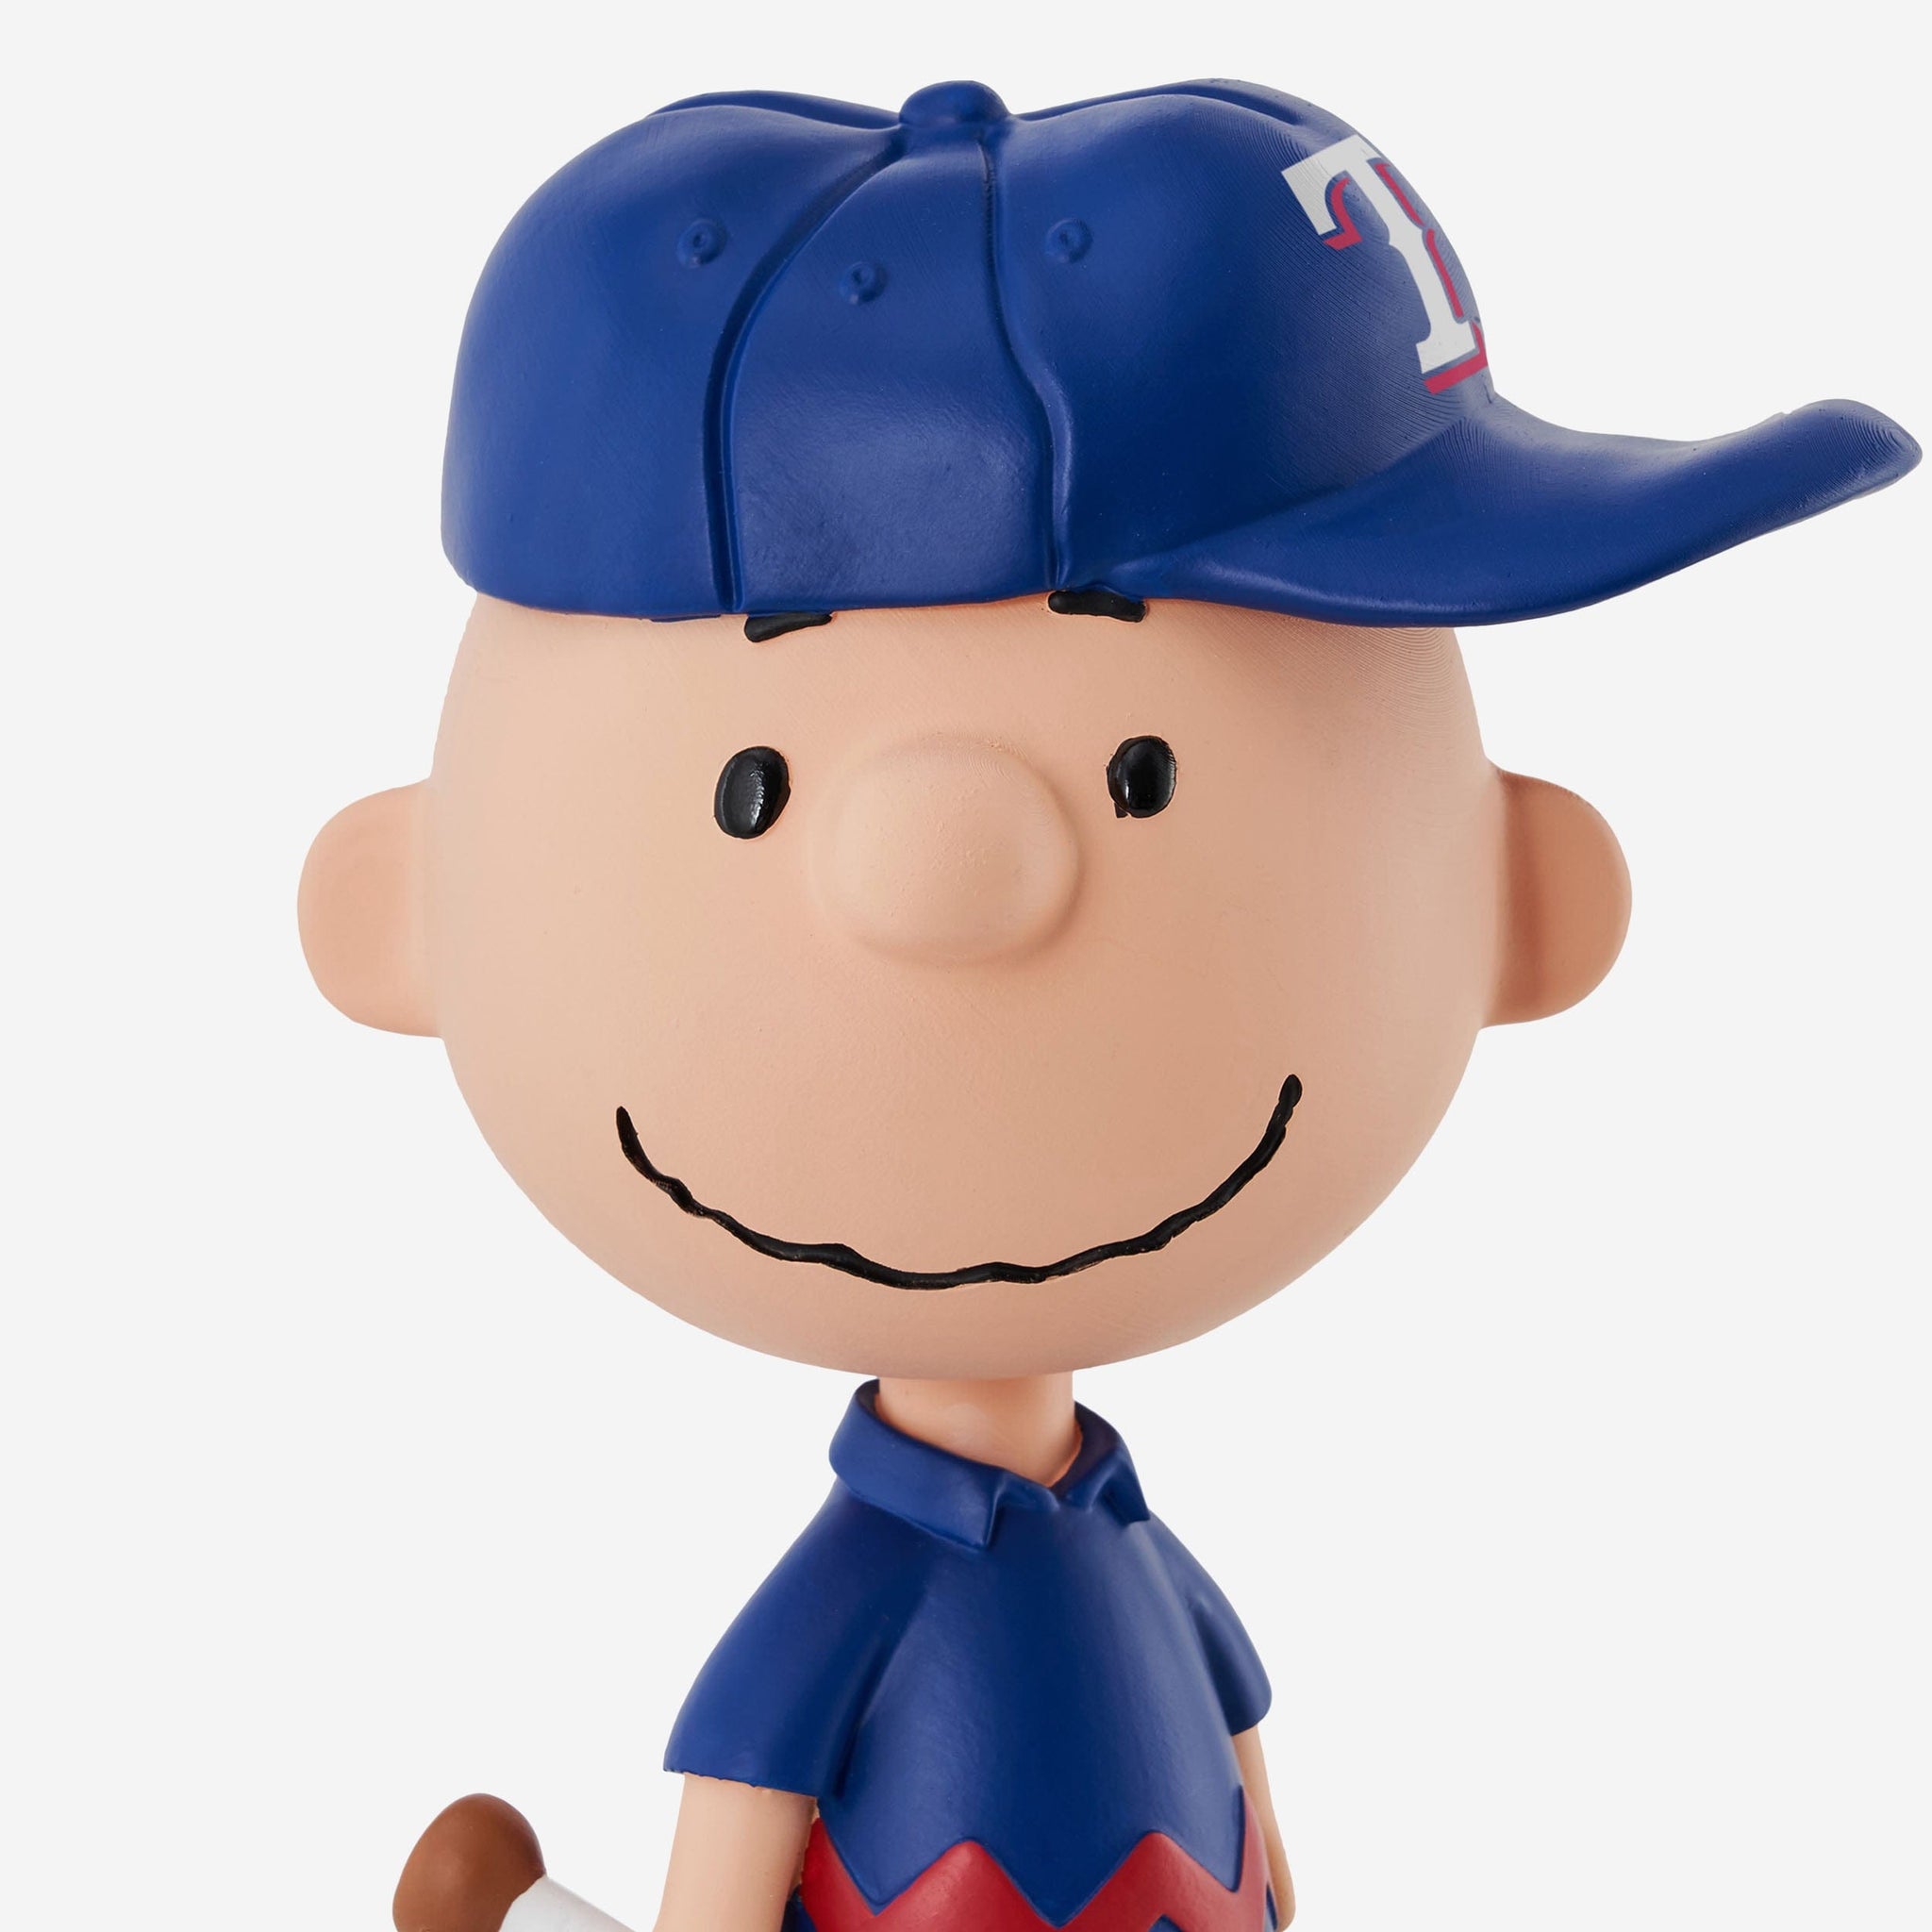 Peanuts Charlie Brown And Snoopy Playing Baseball Chicago Cubs T